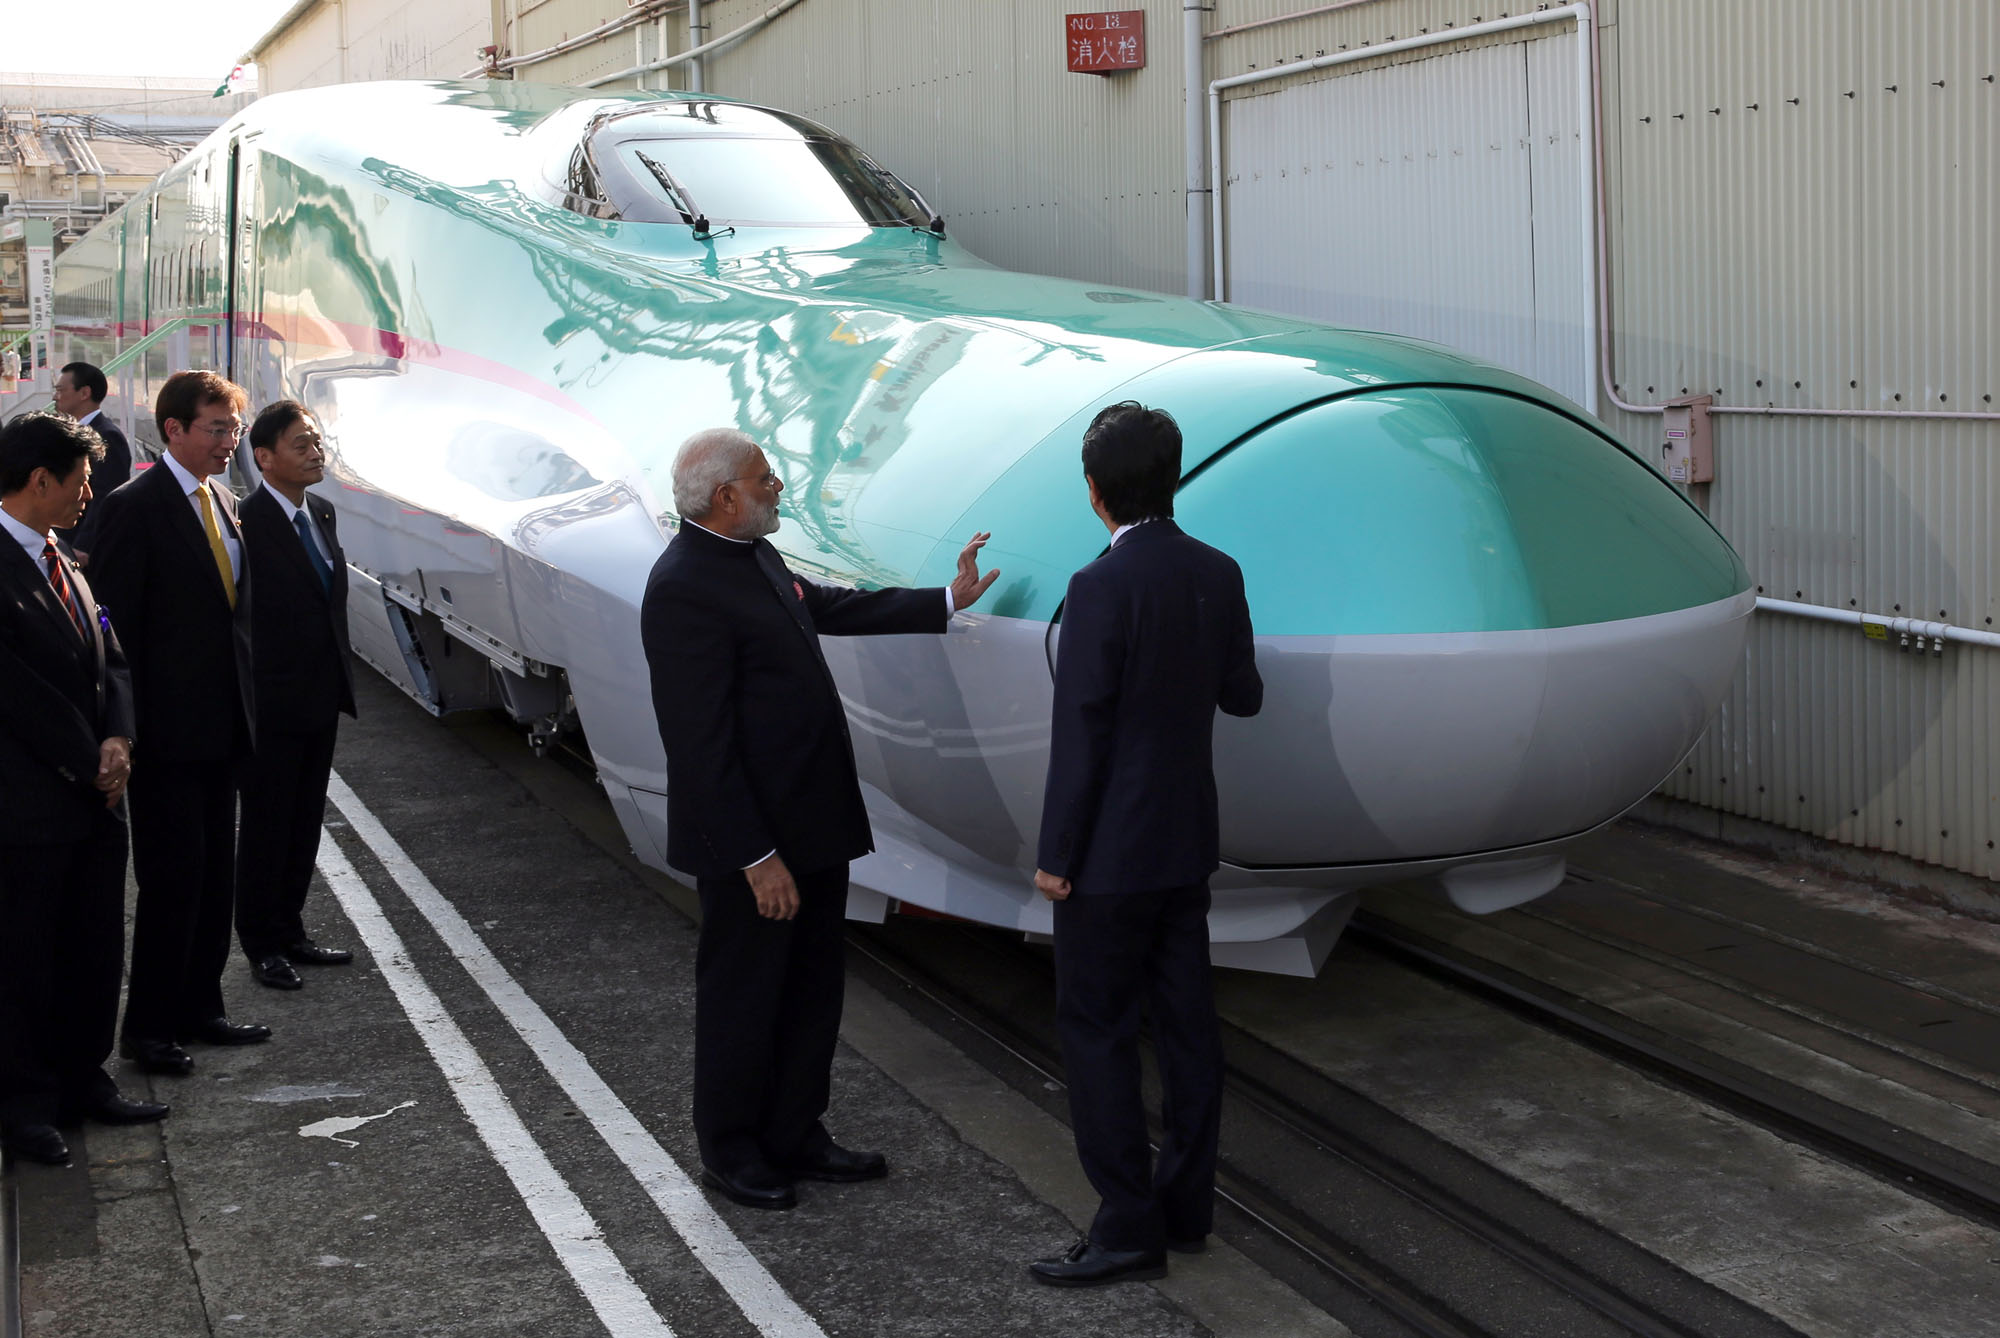 Indian Prime Minister Narendra Modi and Prime Minister Shinzo Abe inspect an E5 series bullet train locomotive at a Kawasaki Heavy Industries plant in Kobe in November 2016. Modi picked Japan as a partner for India's first high-speed rail line. | BLOOMBERG